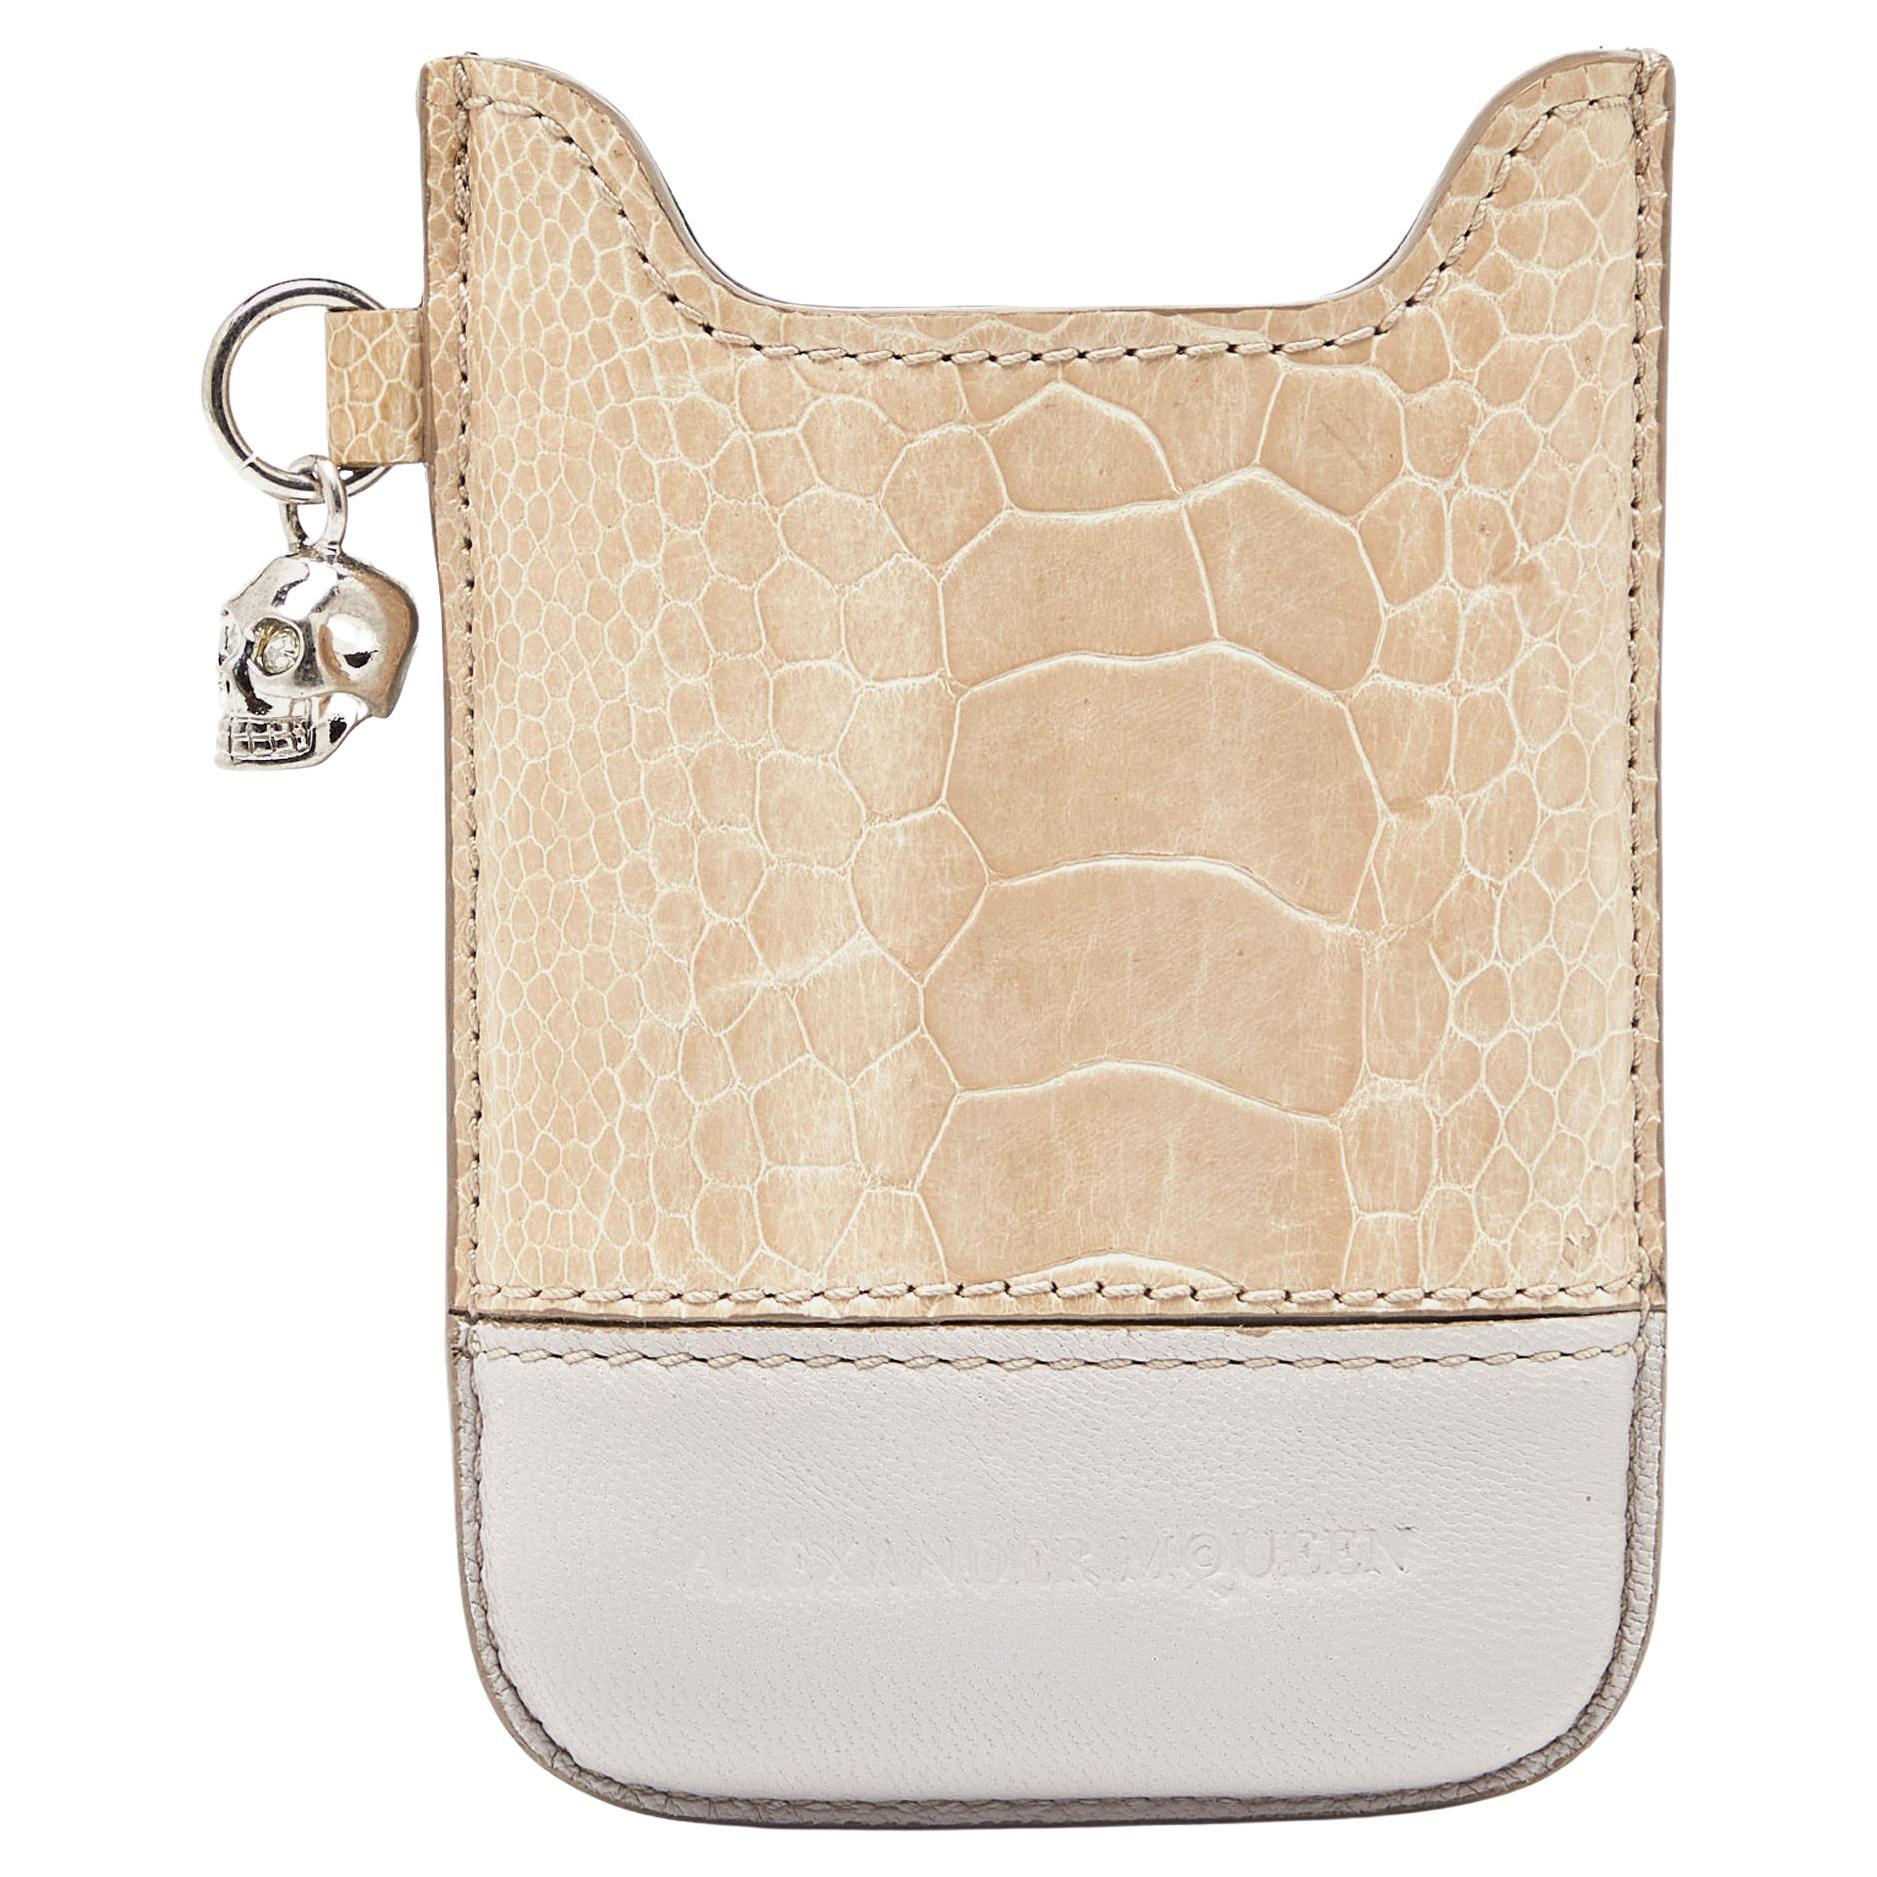 Alexander Mcqueen Beige Croc Embossed and Leather Phone Case For Sale